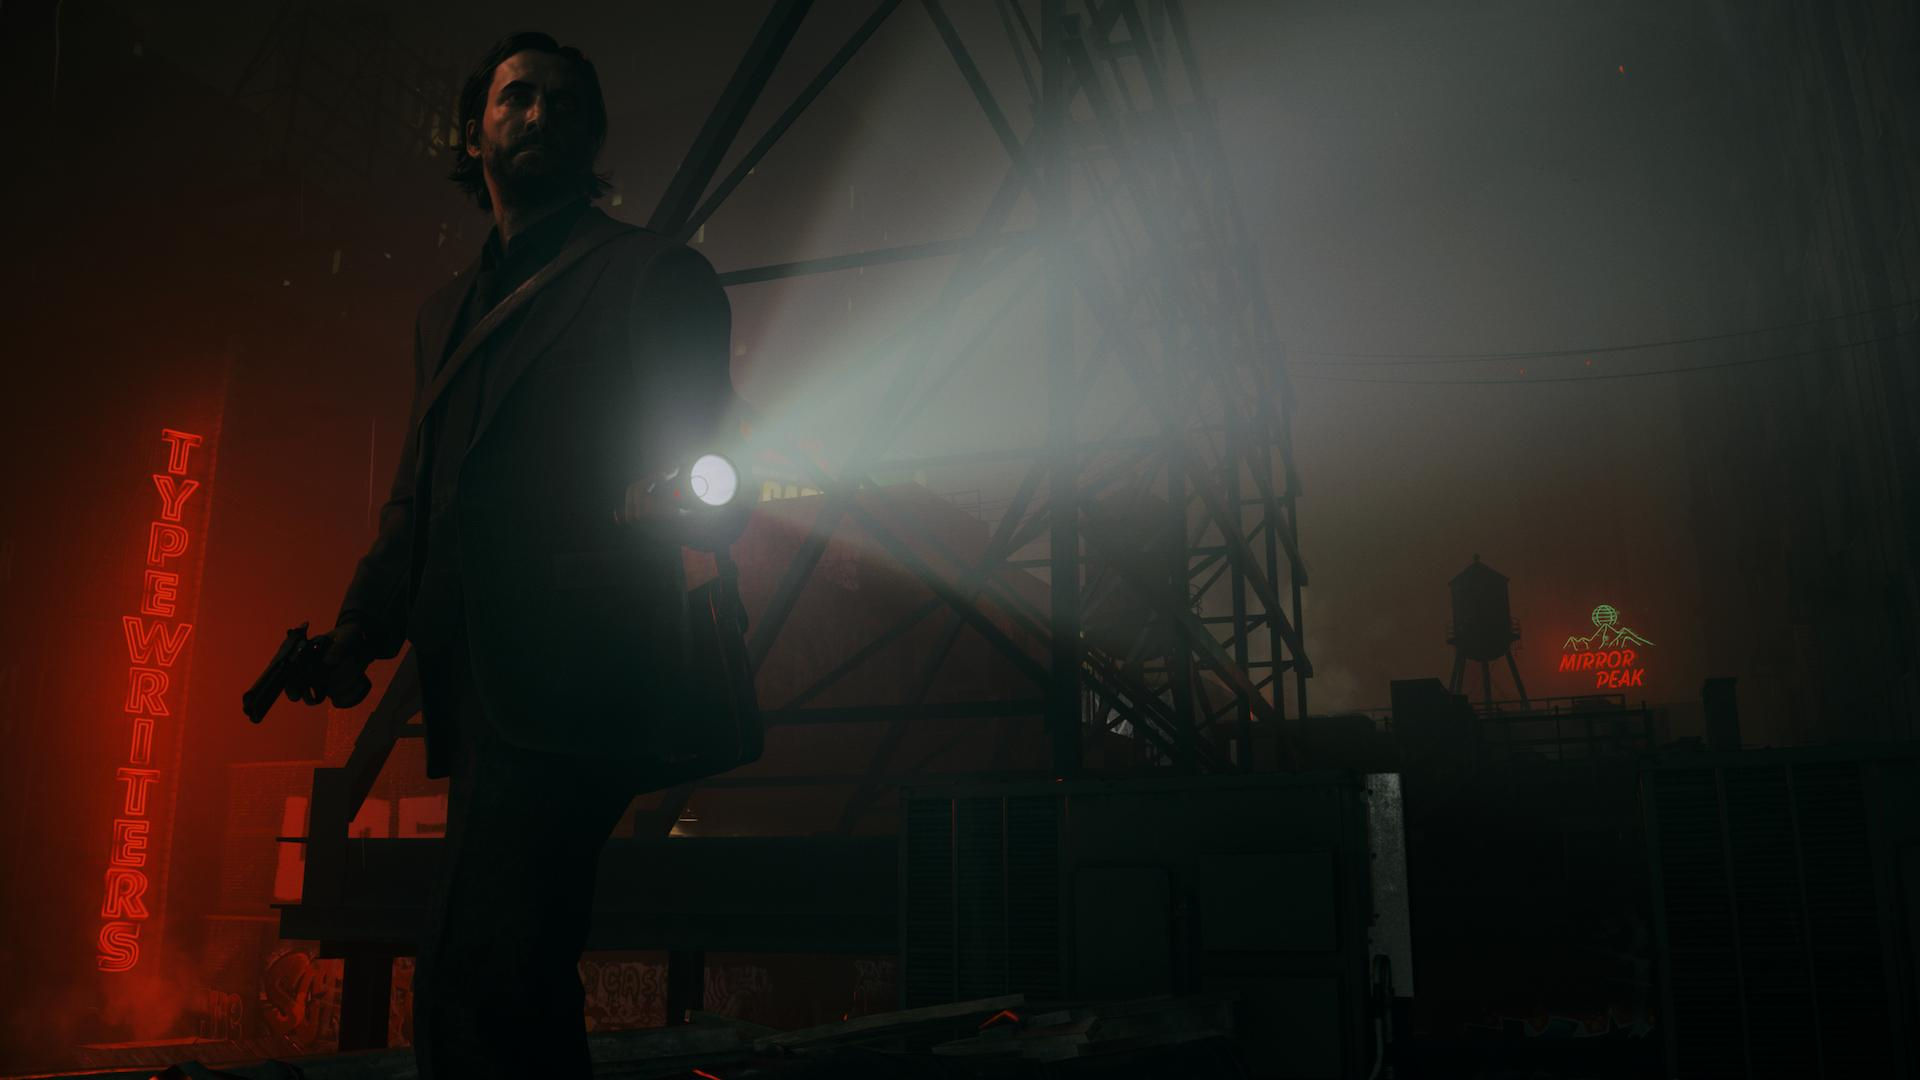 New Alan Wake 2 prequel launches for free in Fortnite